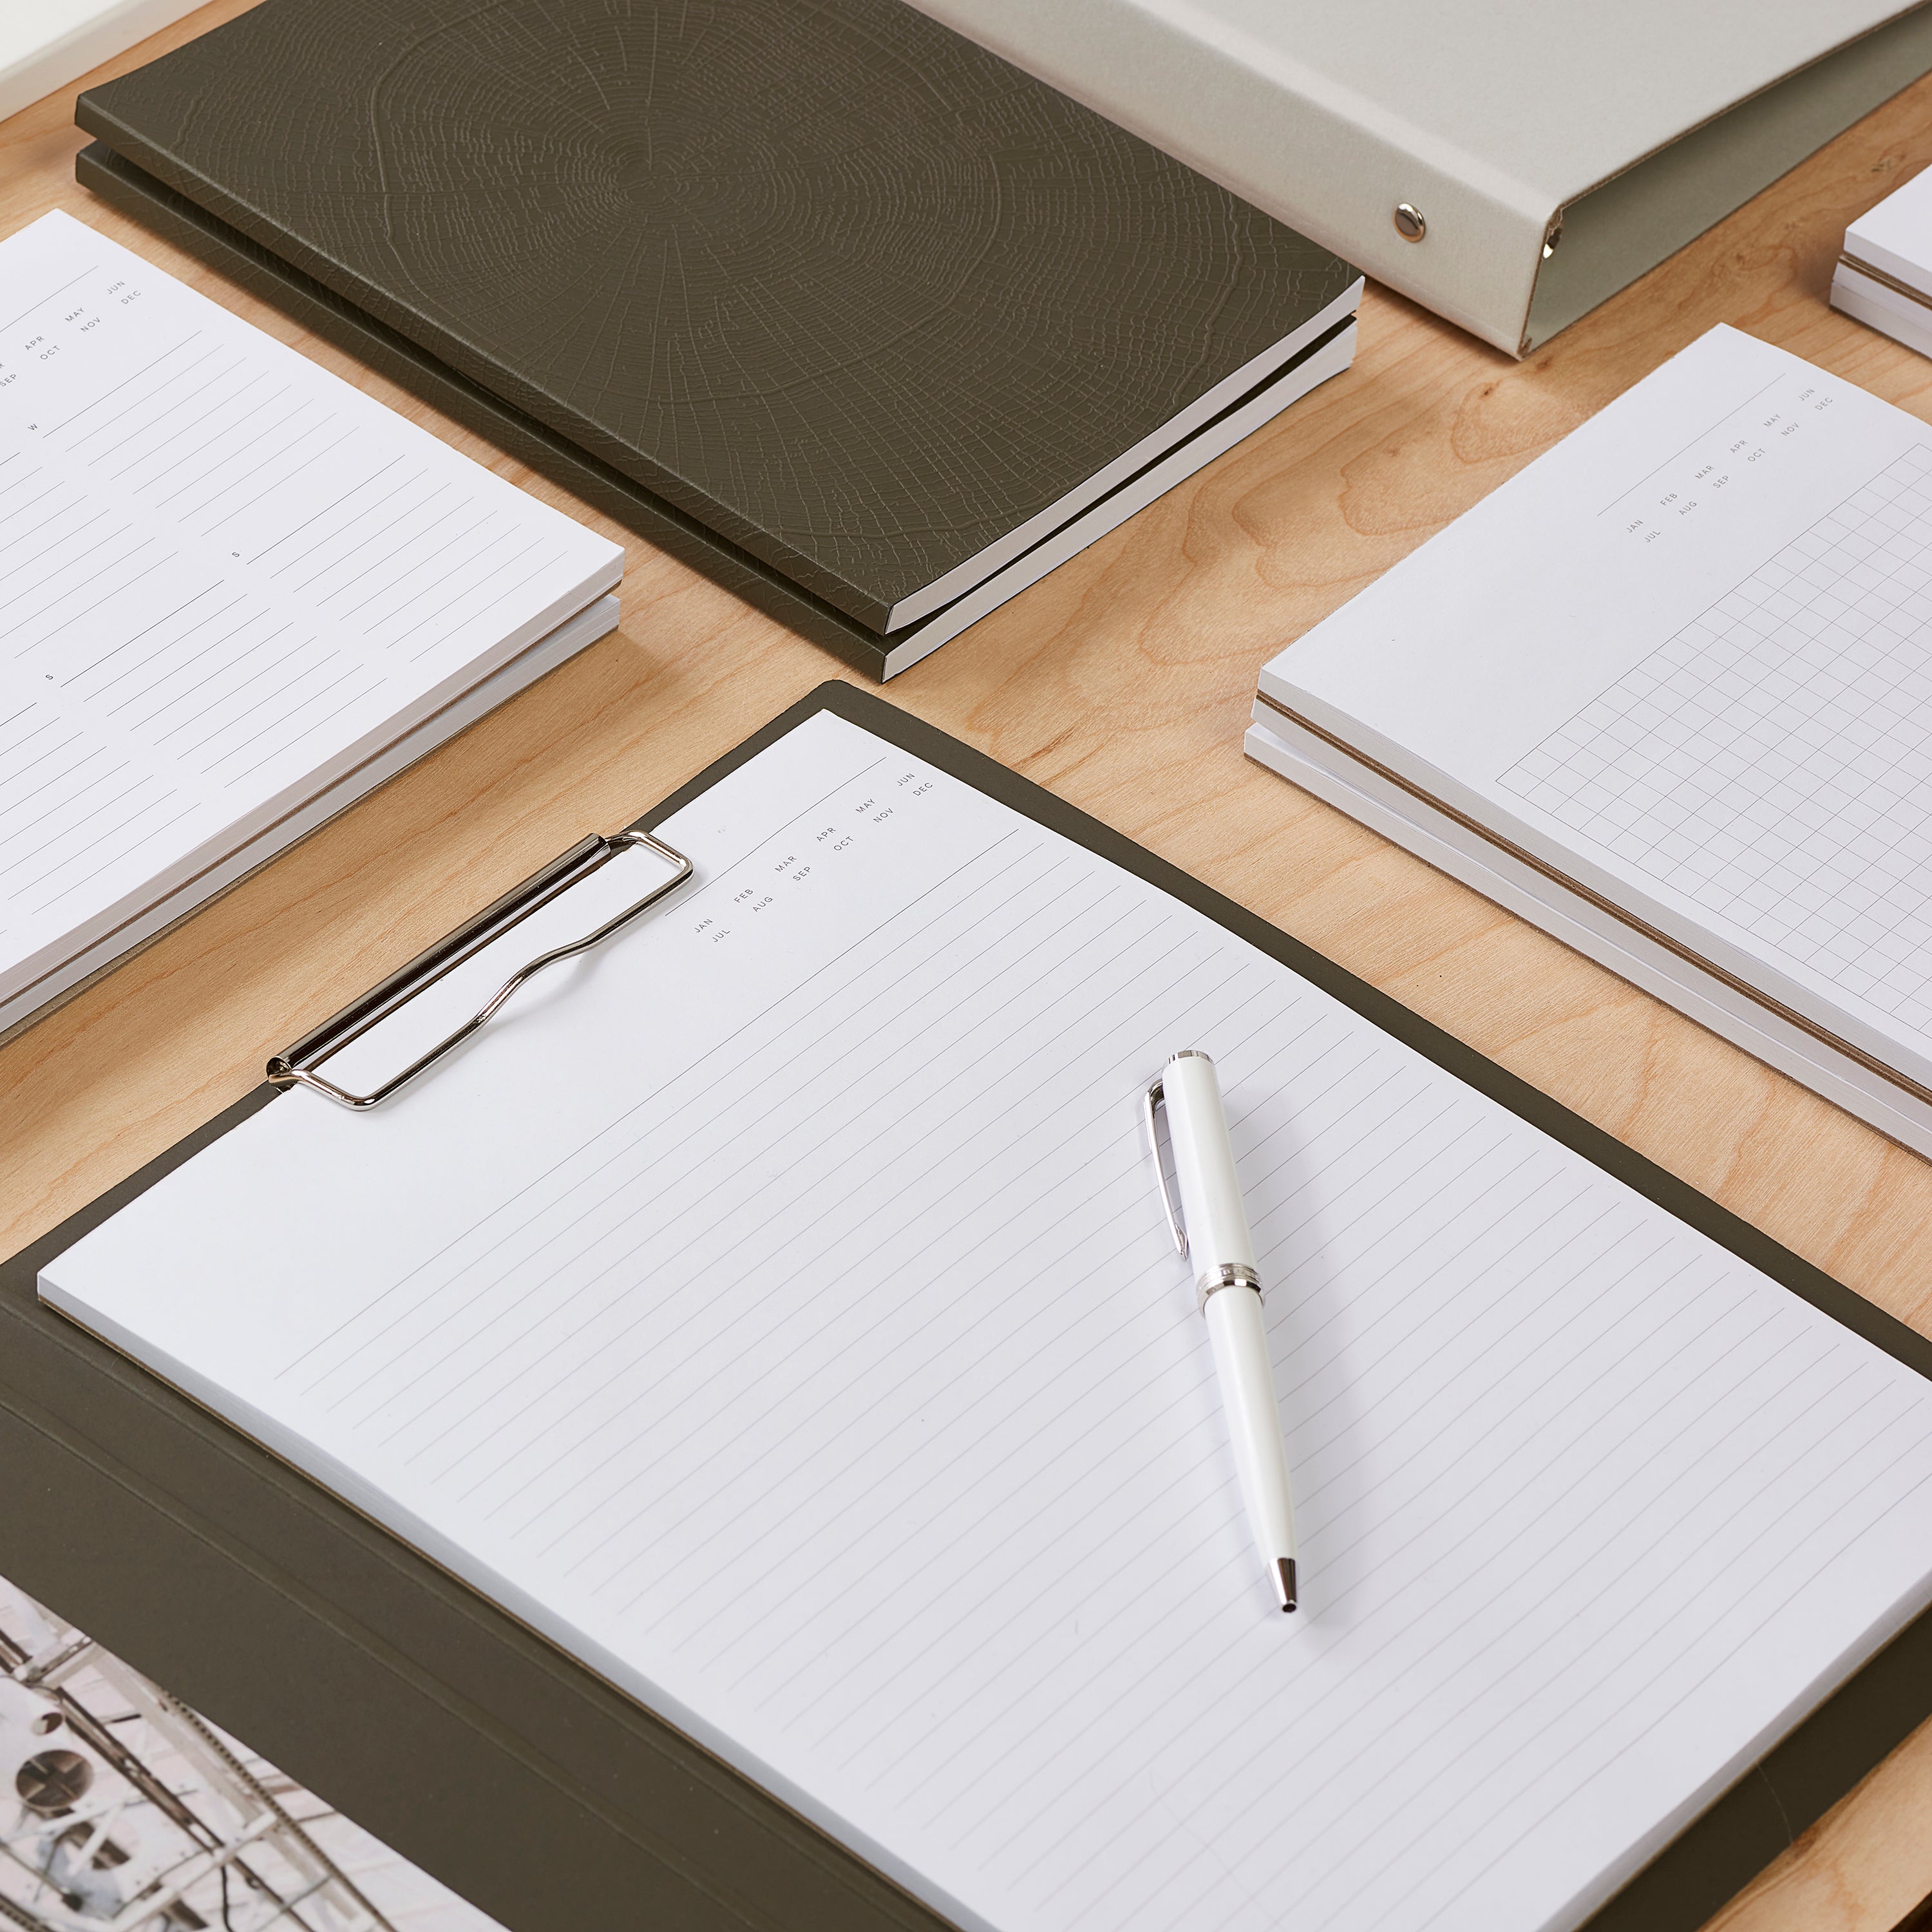 2pk Lined Paper Pad - Good Office Day